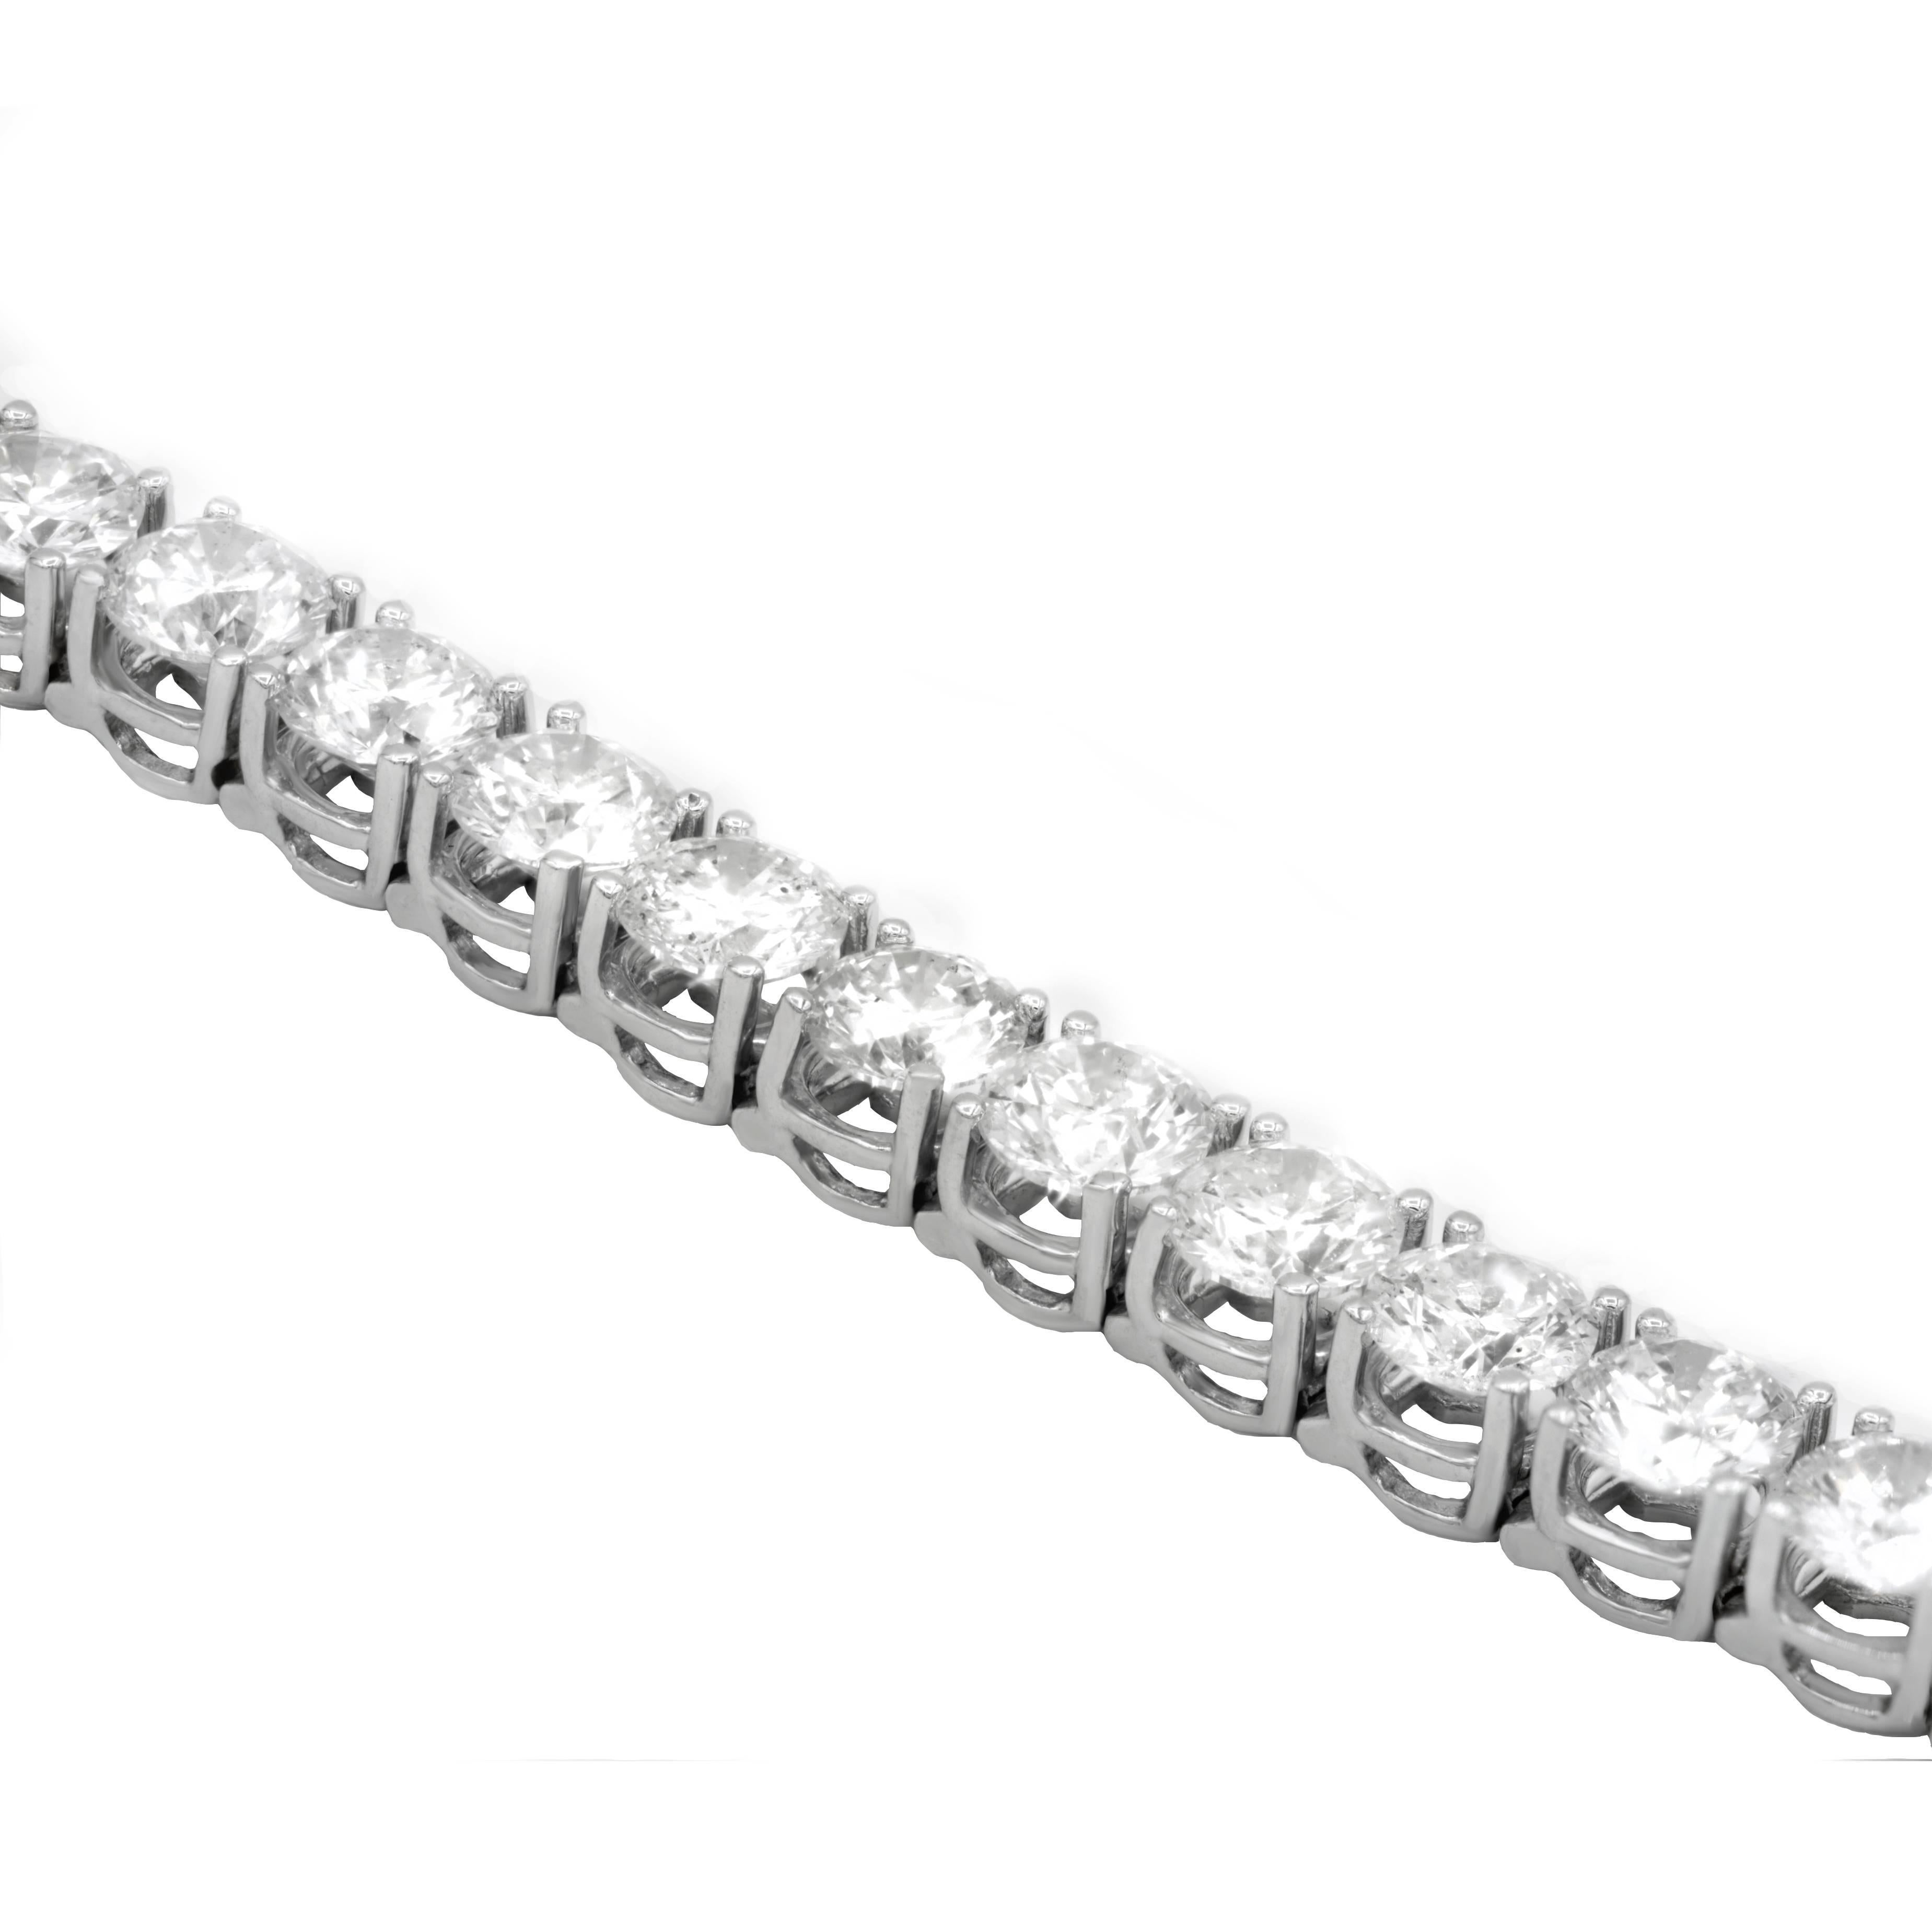 Classic four prong tennis bracelet consisting of 33 round brilliant cut diamonds,weighing 20.35 carats total GH color and slightly included clarity,set in 18 karat white gold mounting.